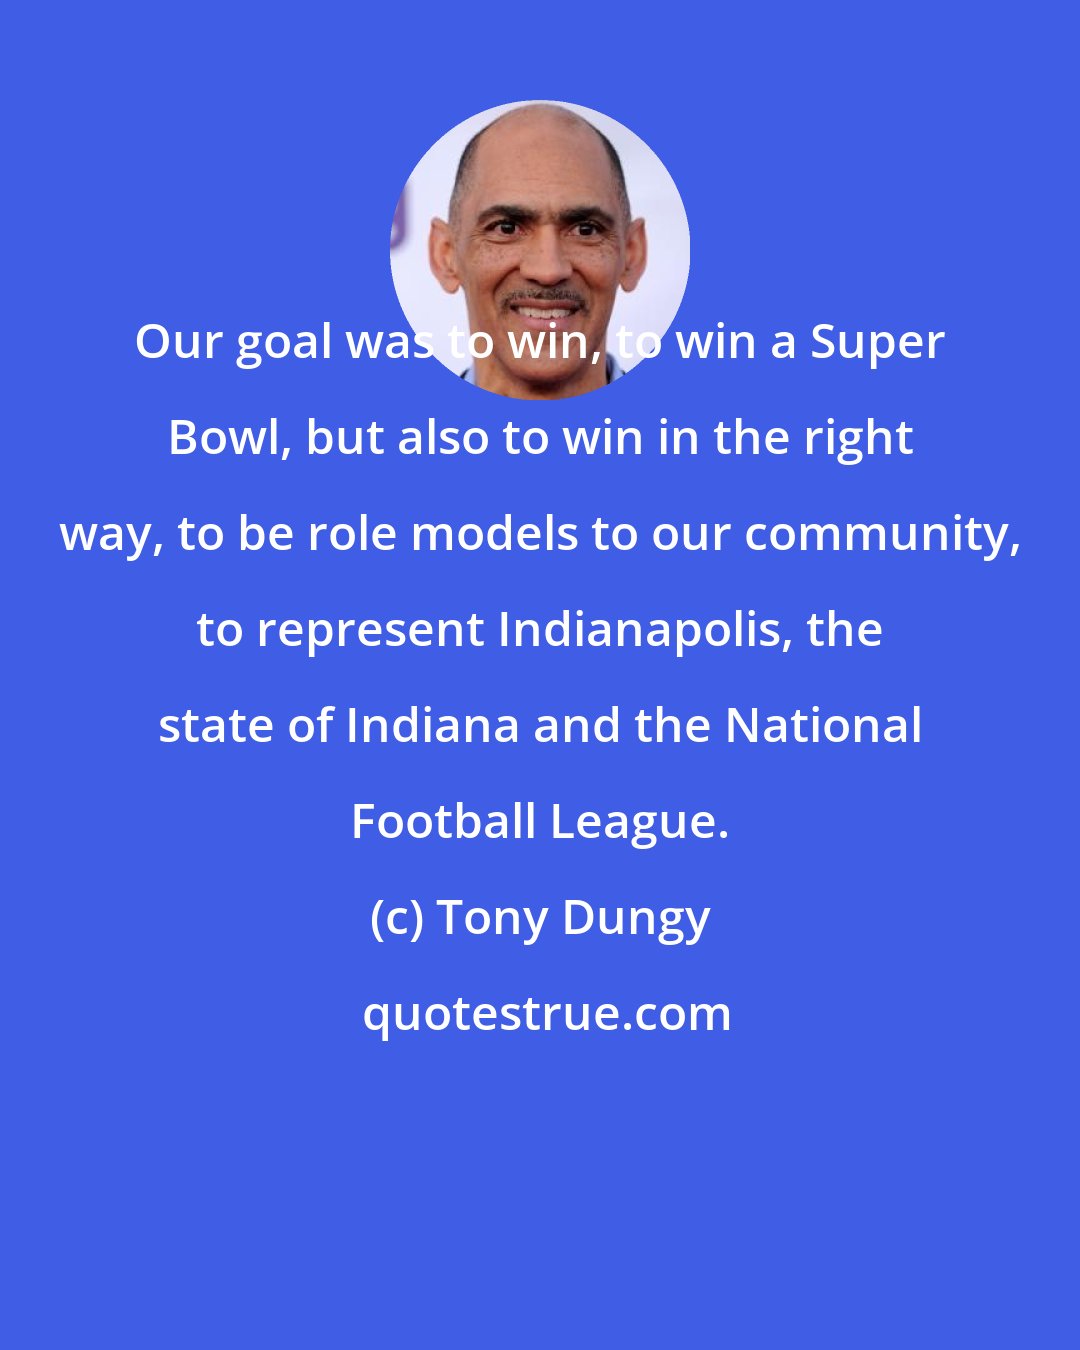 Tony Dungy: Our goal was to win, to win a Super Bowl, but also to win in the right way, to be role models to our community, to represent Indianapolis, the state of Indiana and the National Football League.